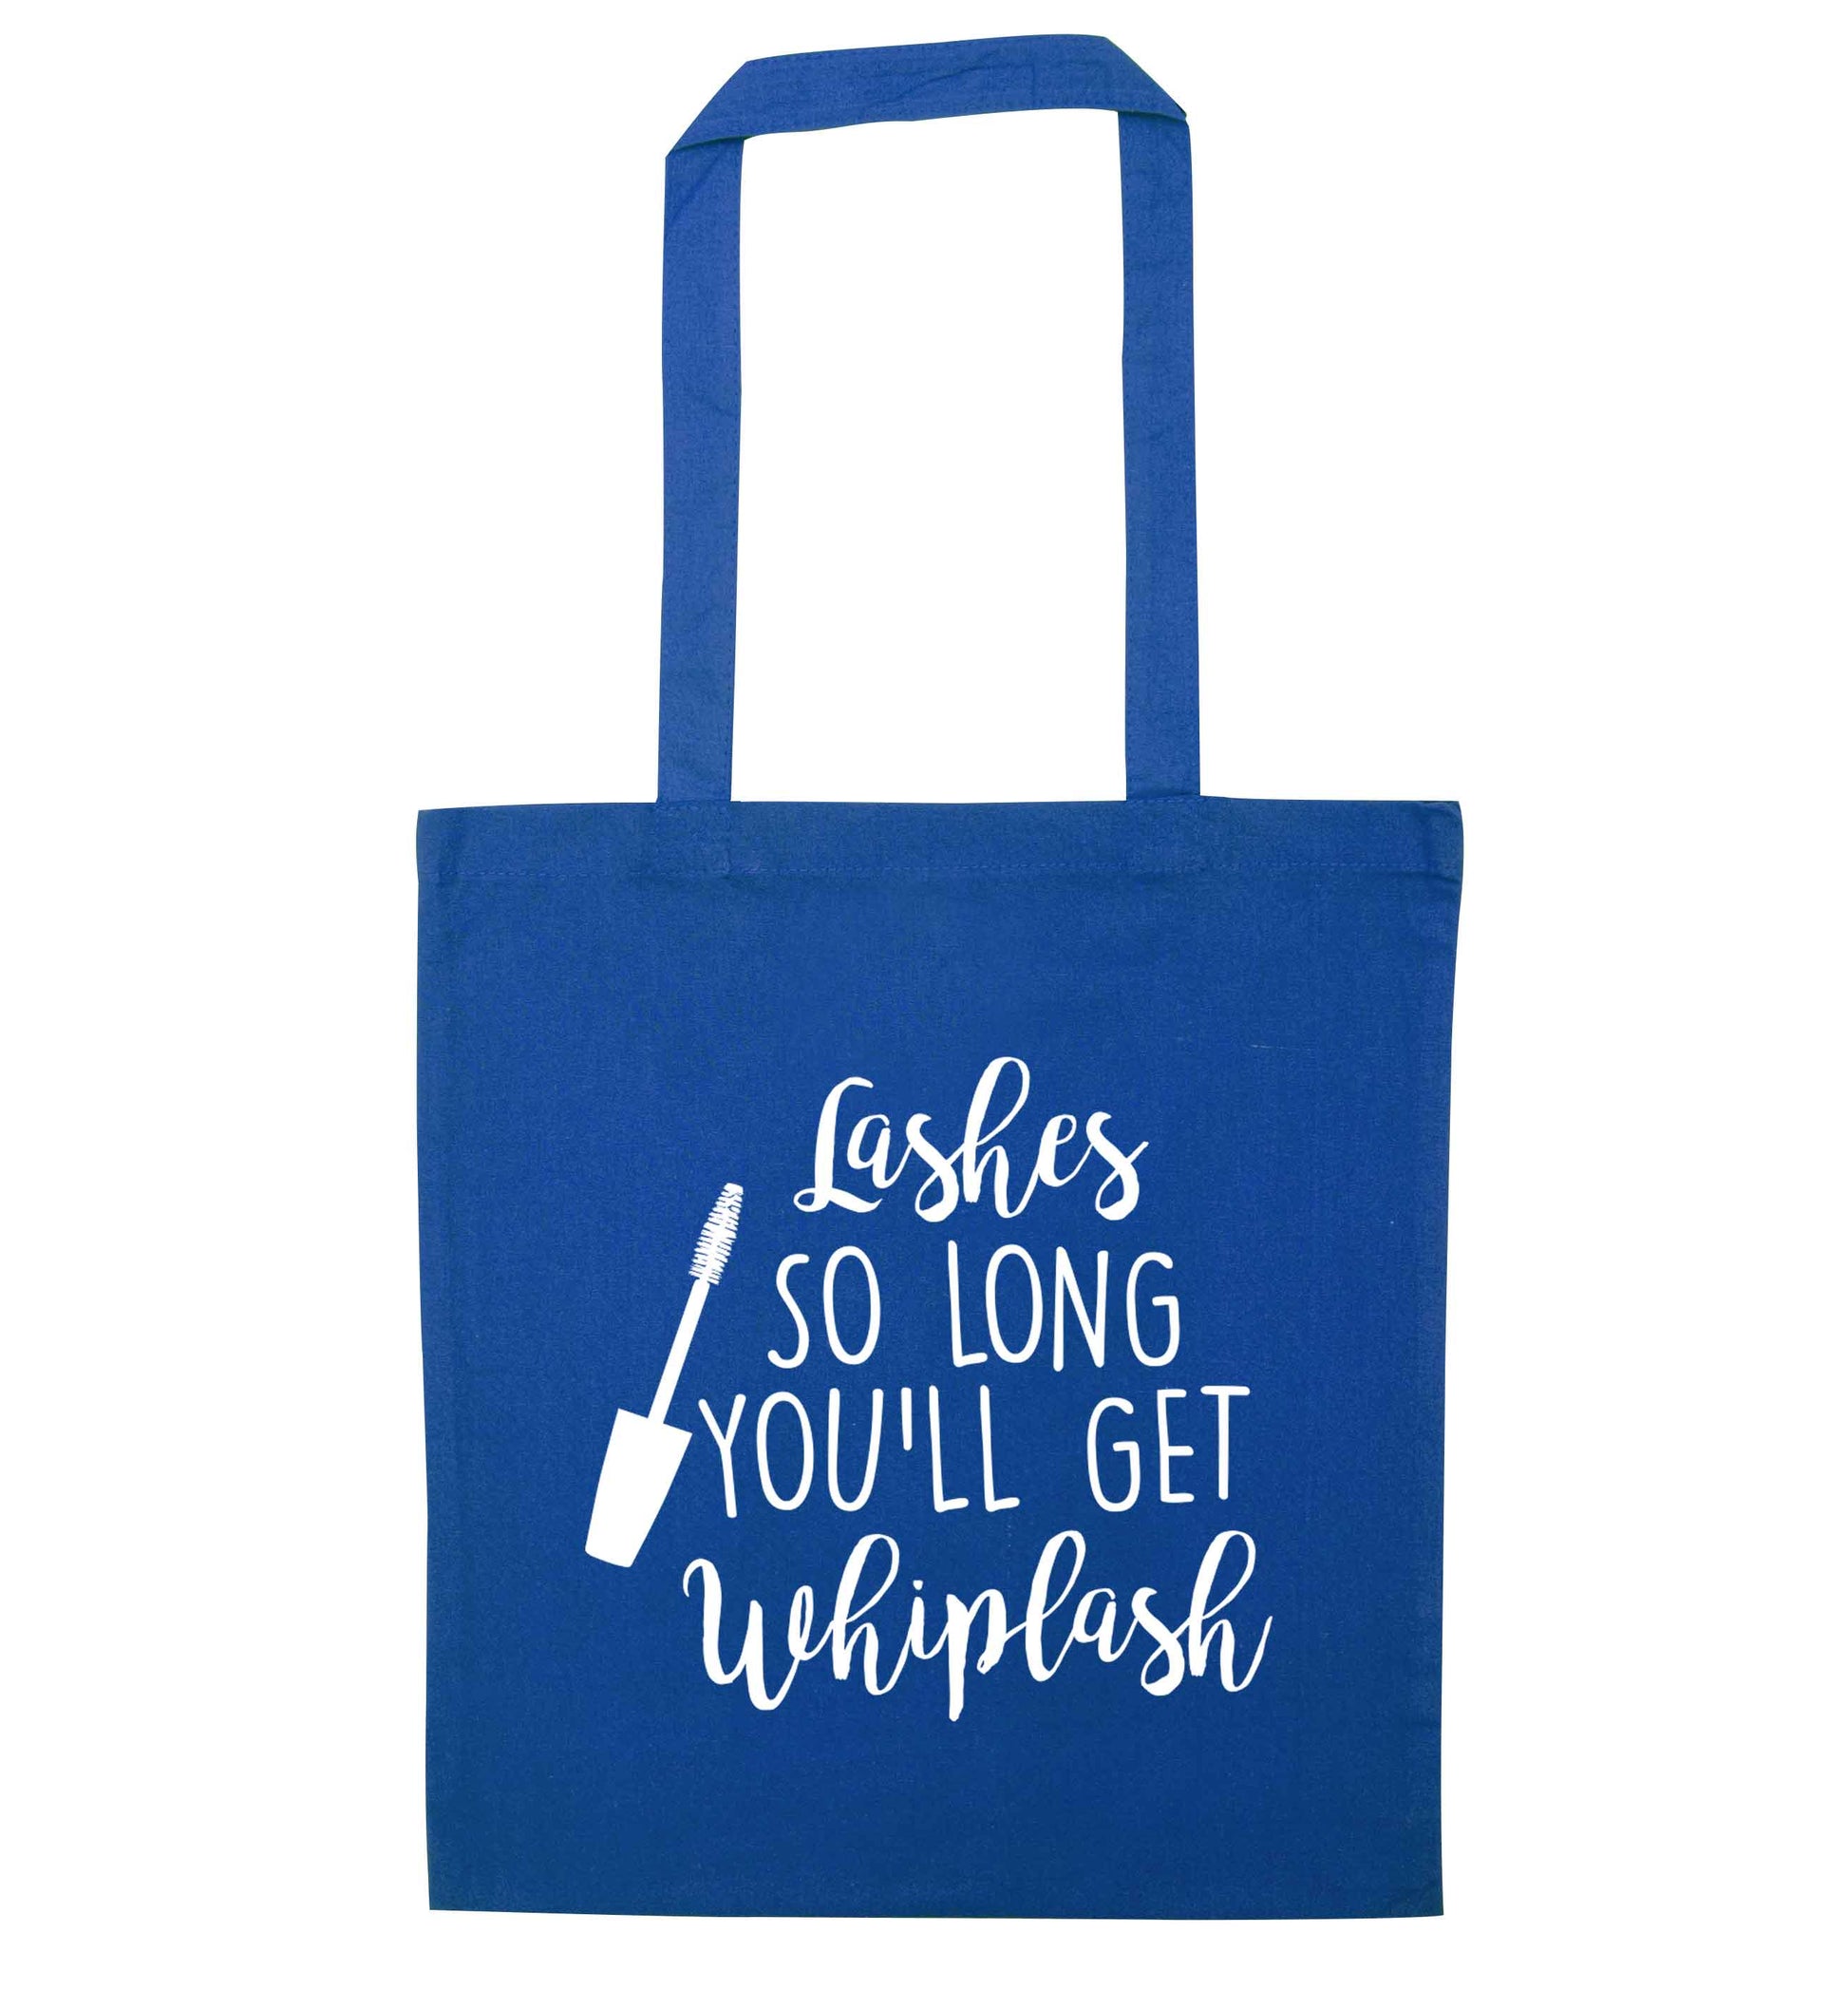 Lashes so long you'll get whiplash blue tote bag